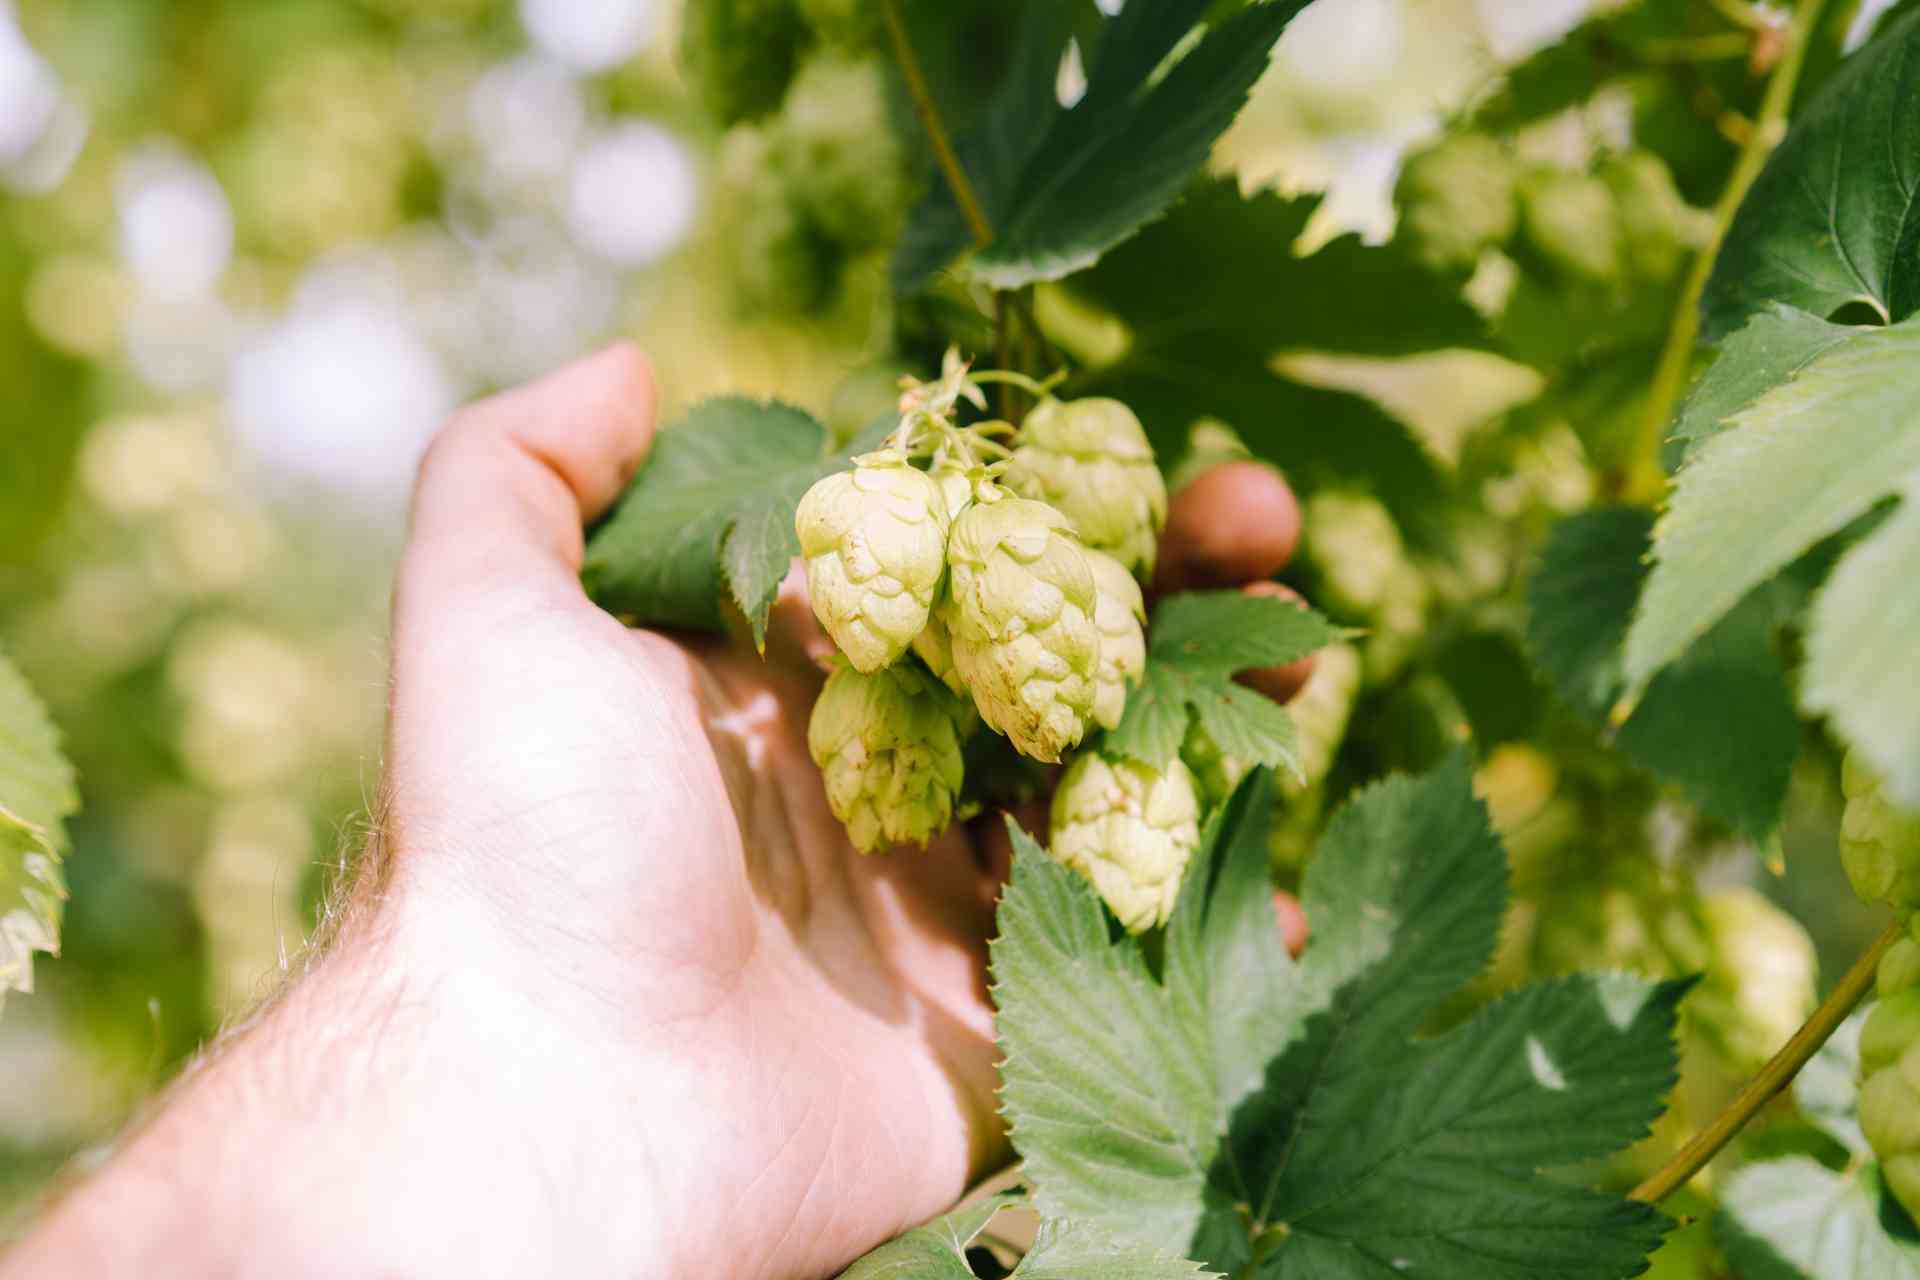 Fuggles hops from Hukins Hop Farm in Sussex